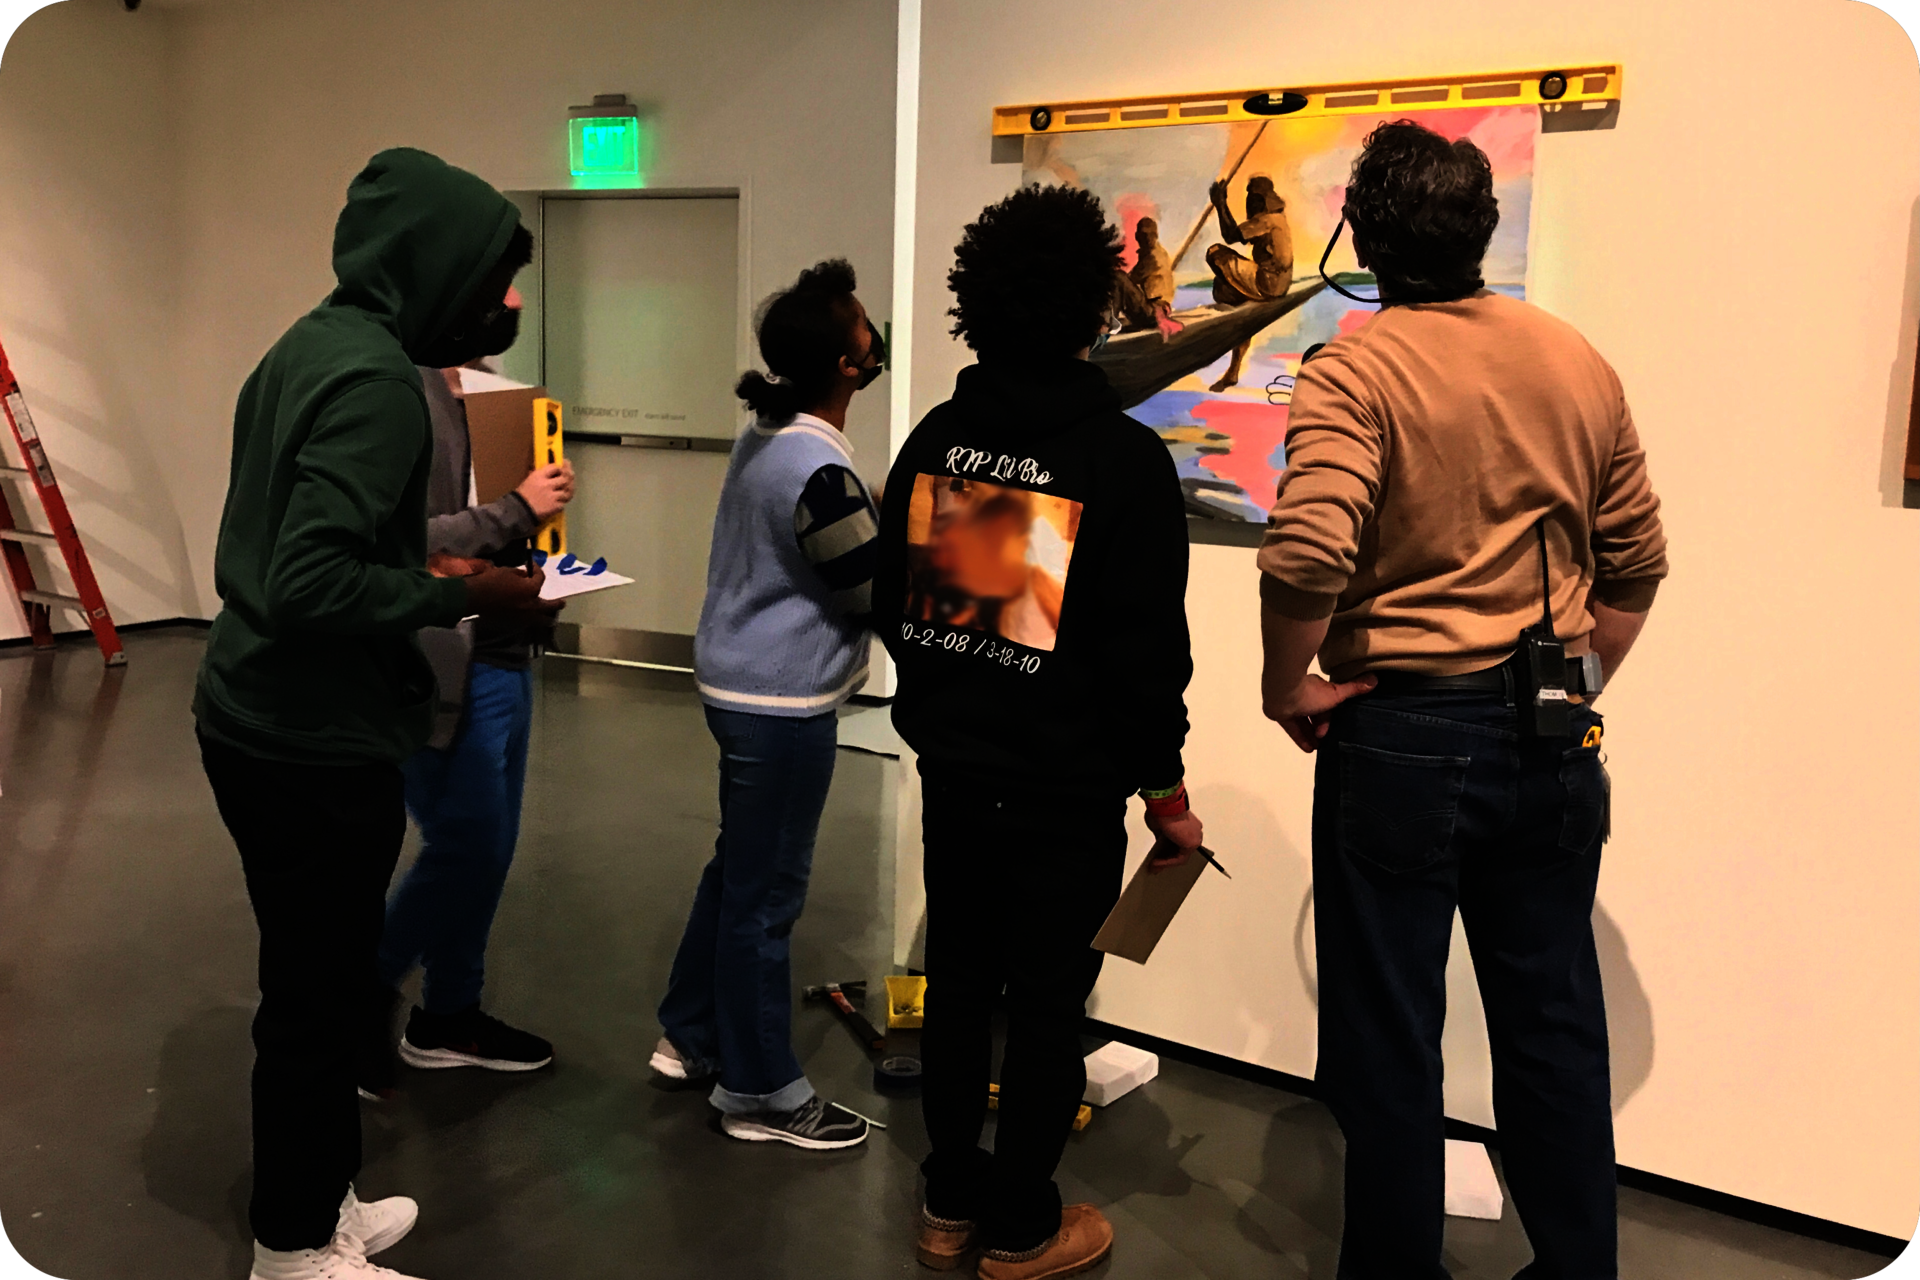 5 people standing around and looking at a painting hung on a wall. A level sits on top of the painting, and several people are holding various tools. 